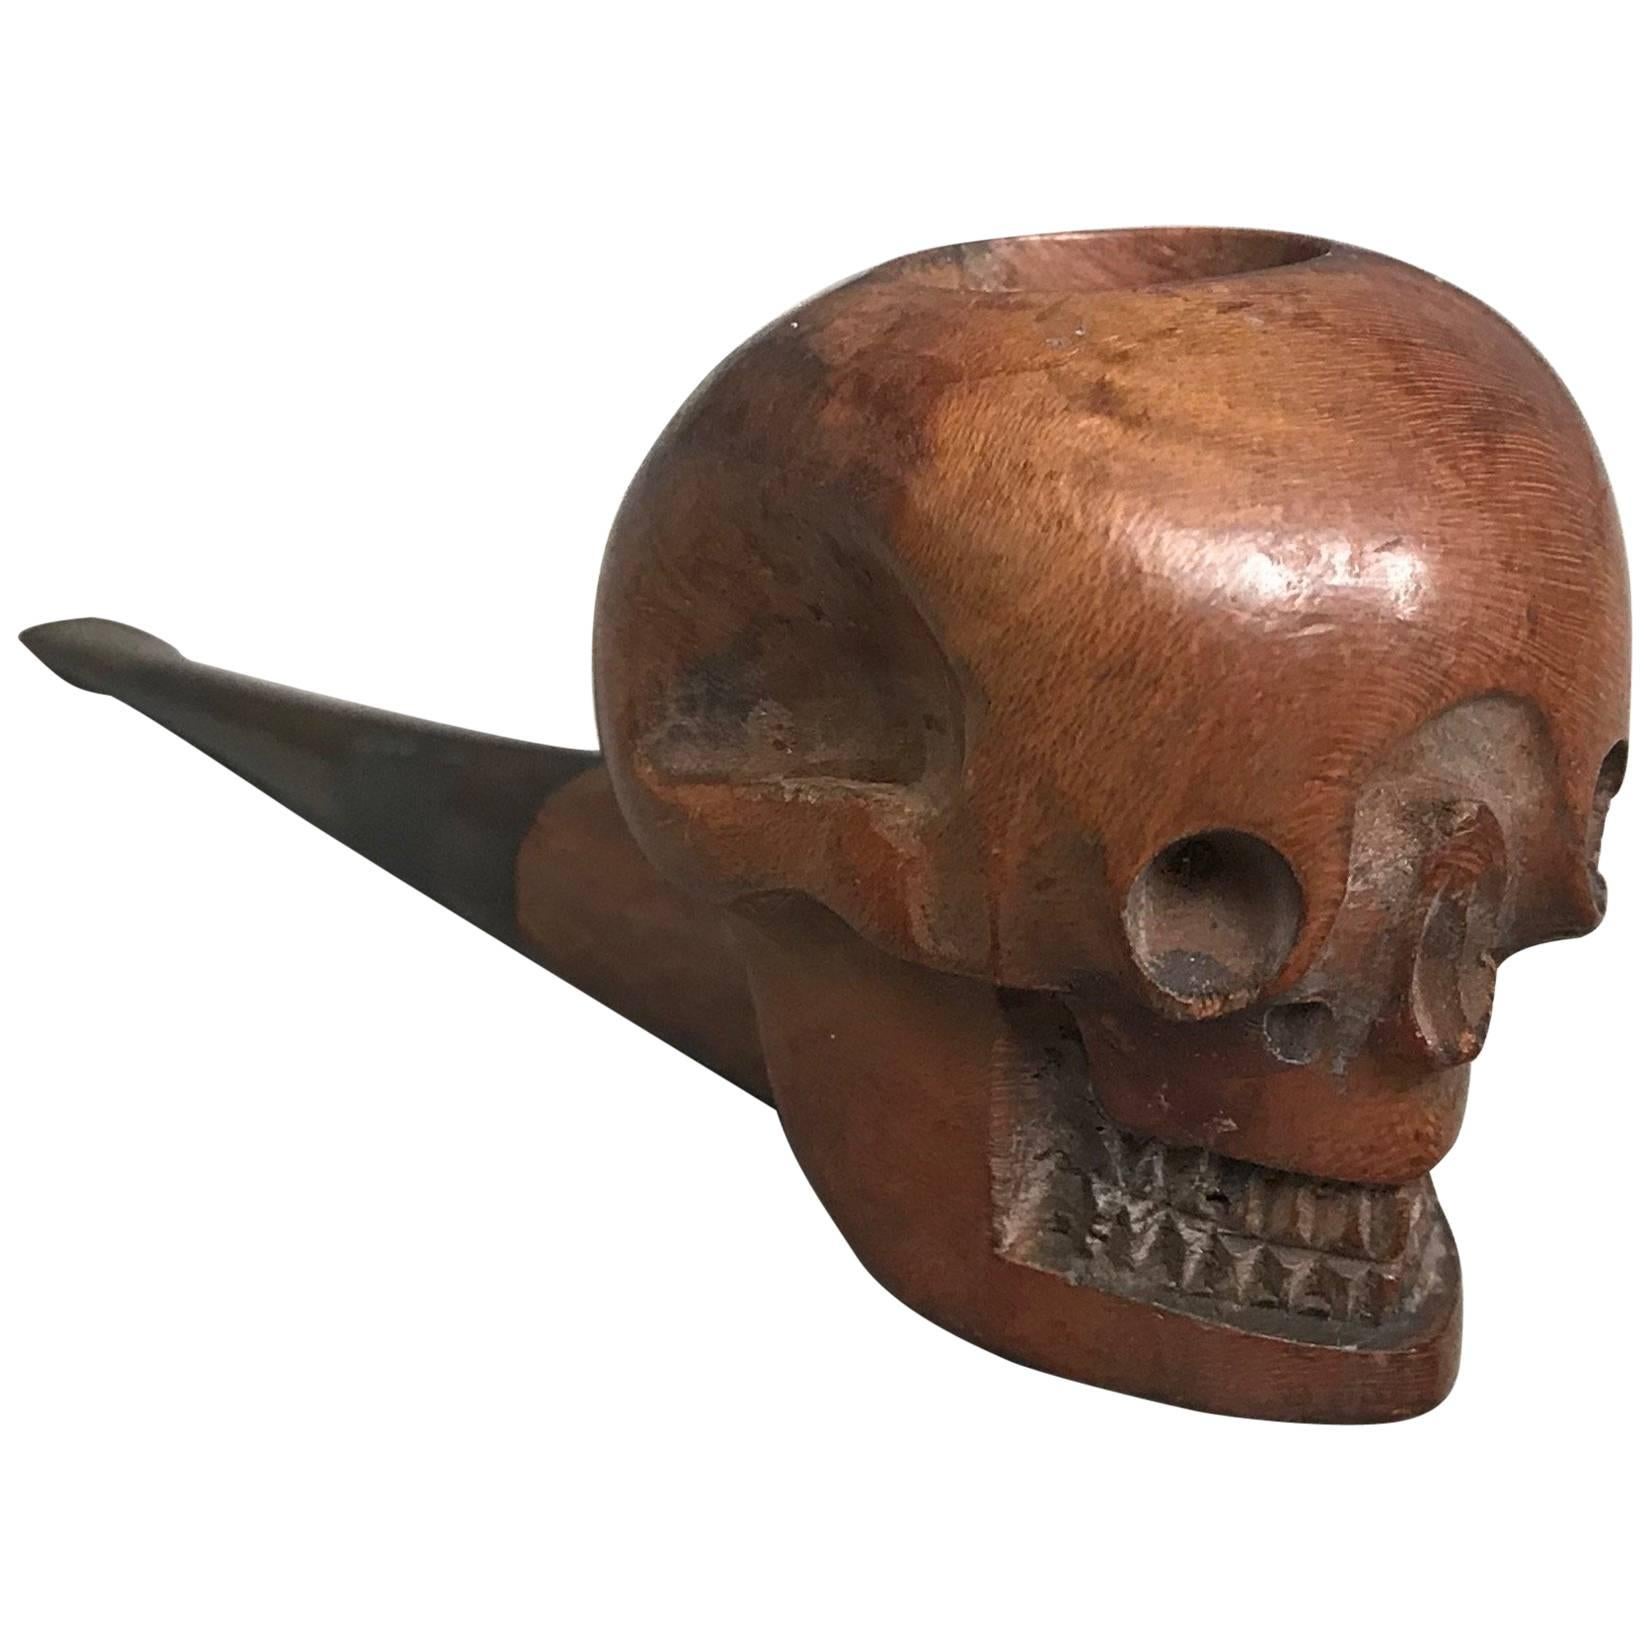 Rare Early 20th Century Hand-Carved and Handcrafted Burl Walnut Human Skull Pipe